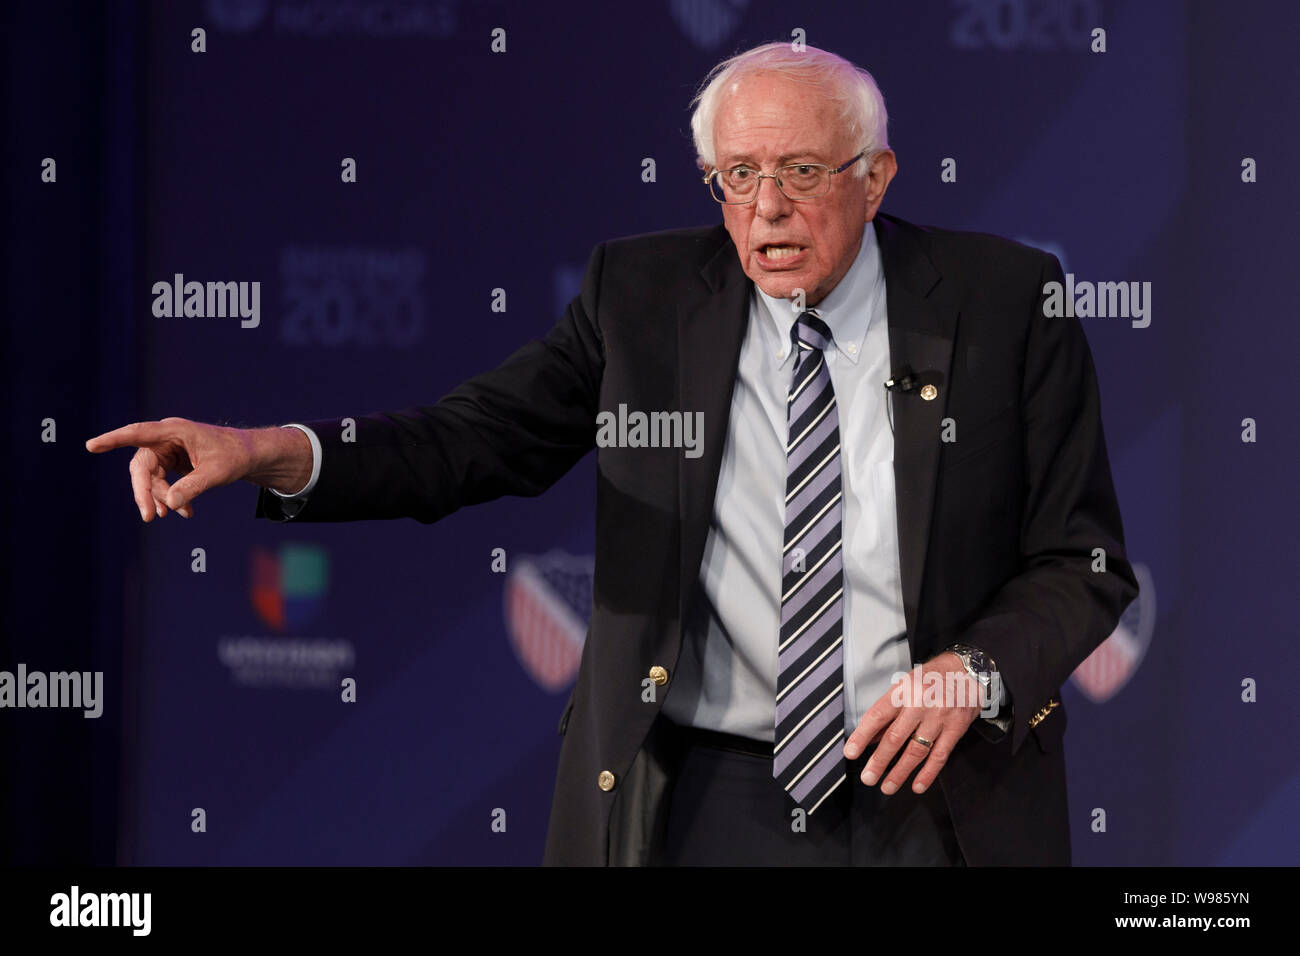 Senator Bernie Sanders, an independent from Vermont and 2020 presidential candidate, points at the crowd while speaking at an event Stock Photo